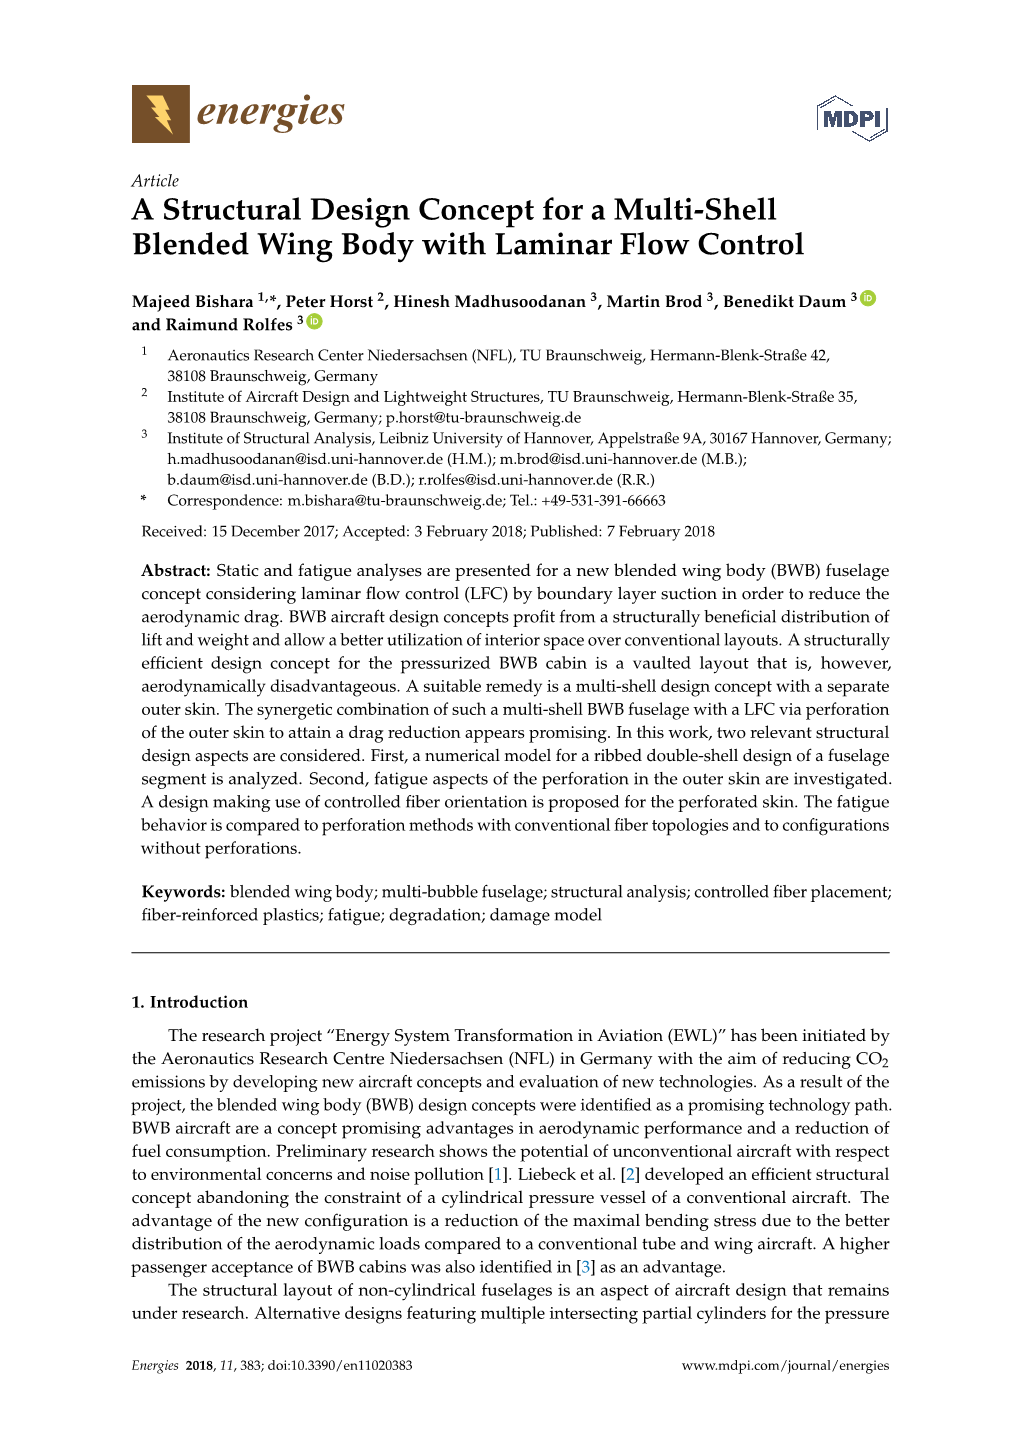 A Structural Design Concept for a Multi-Shell Blended Wing Body with Laminar Flow Control